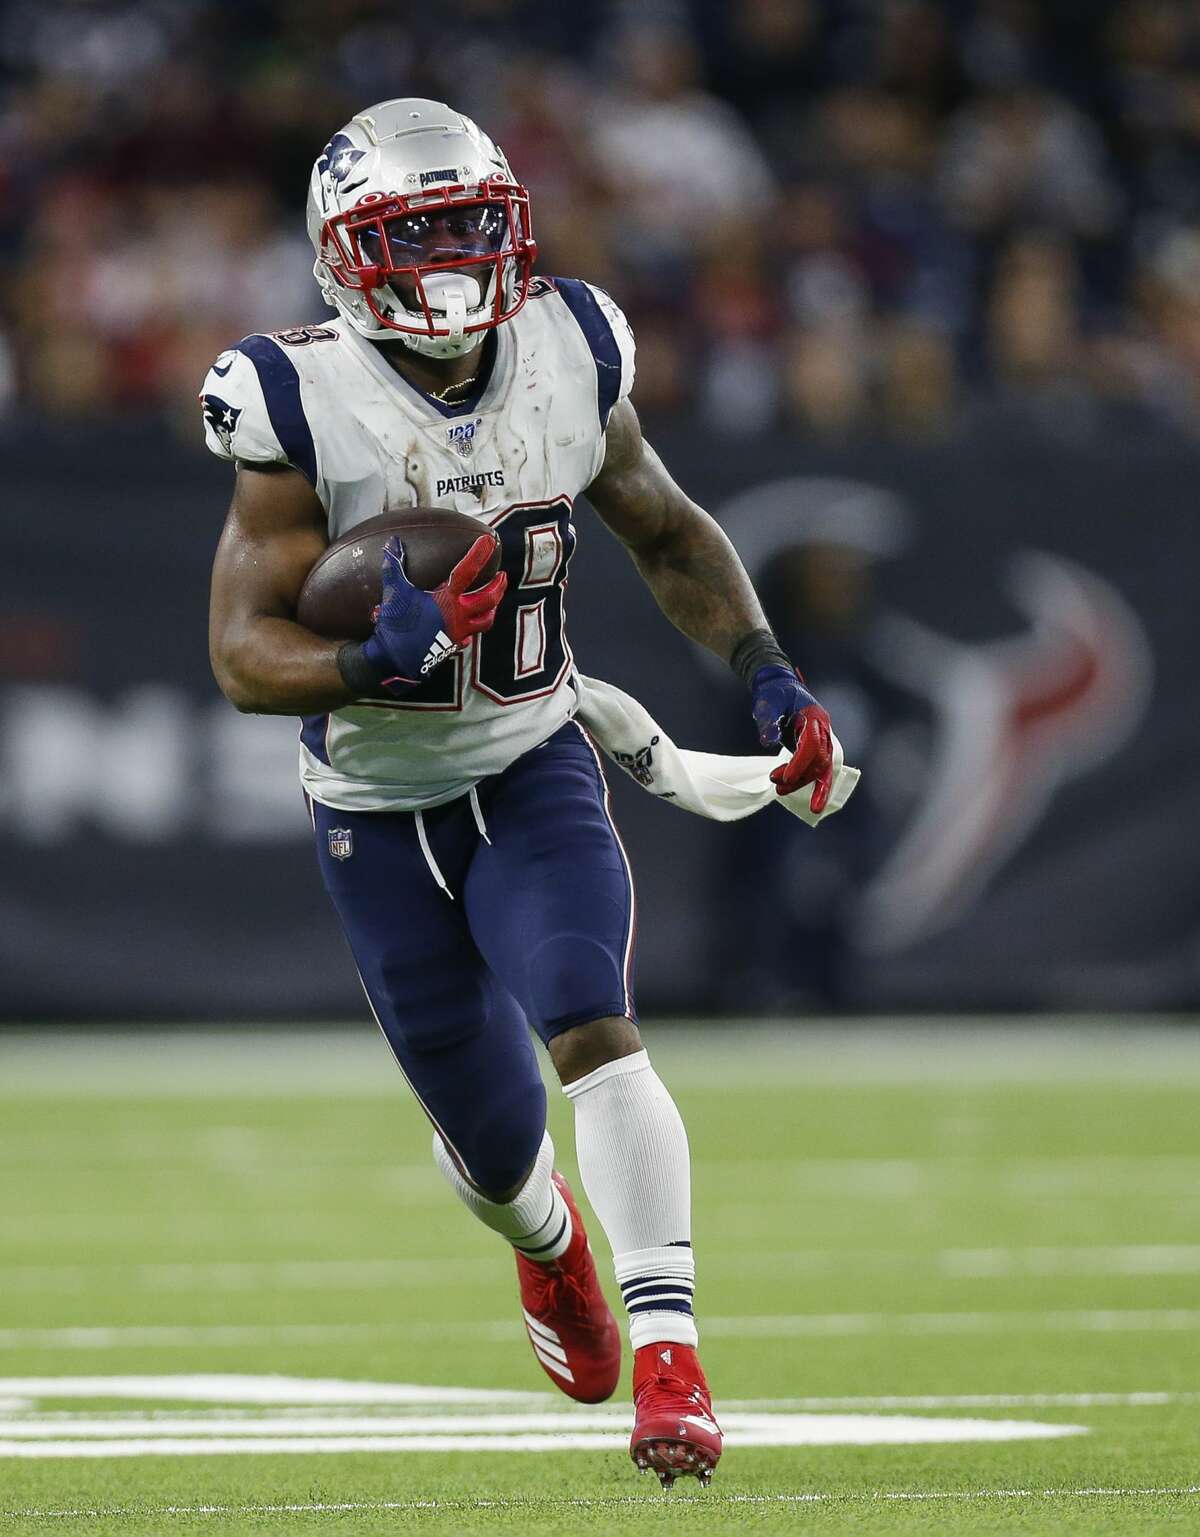 New England Patriots running back James White (28) runs the ball against the Houston Texans during the fourth quarter of an NFL game at NRG Stadium Sunday, Dec. 1, 2019, in Houston.